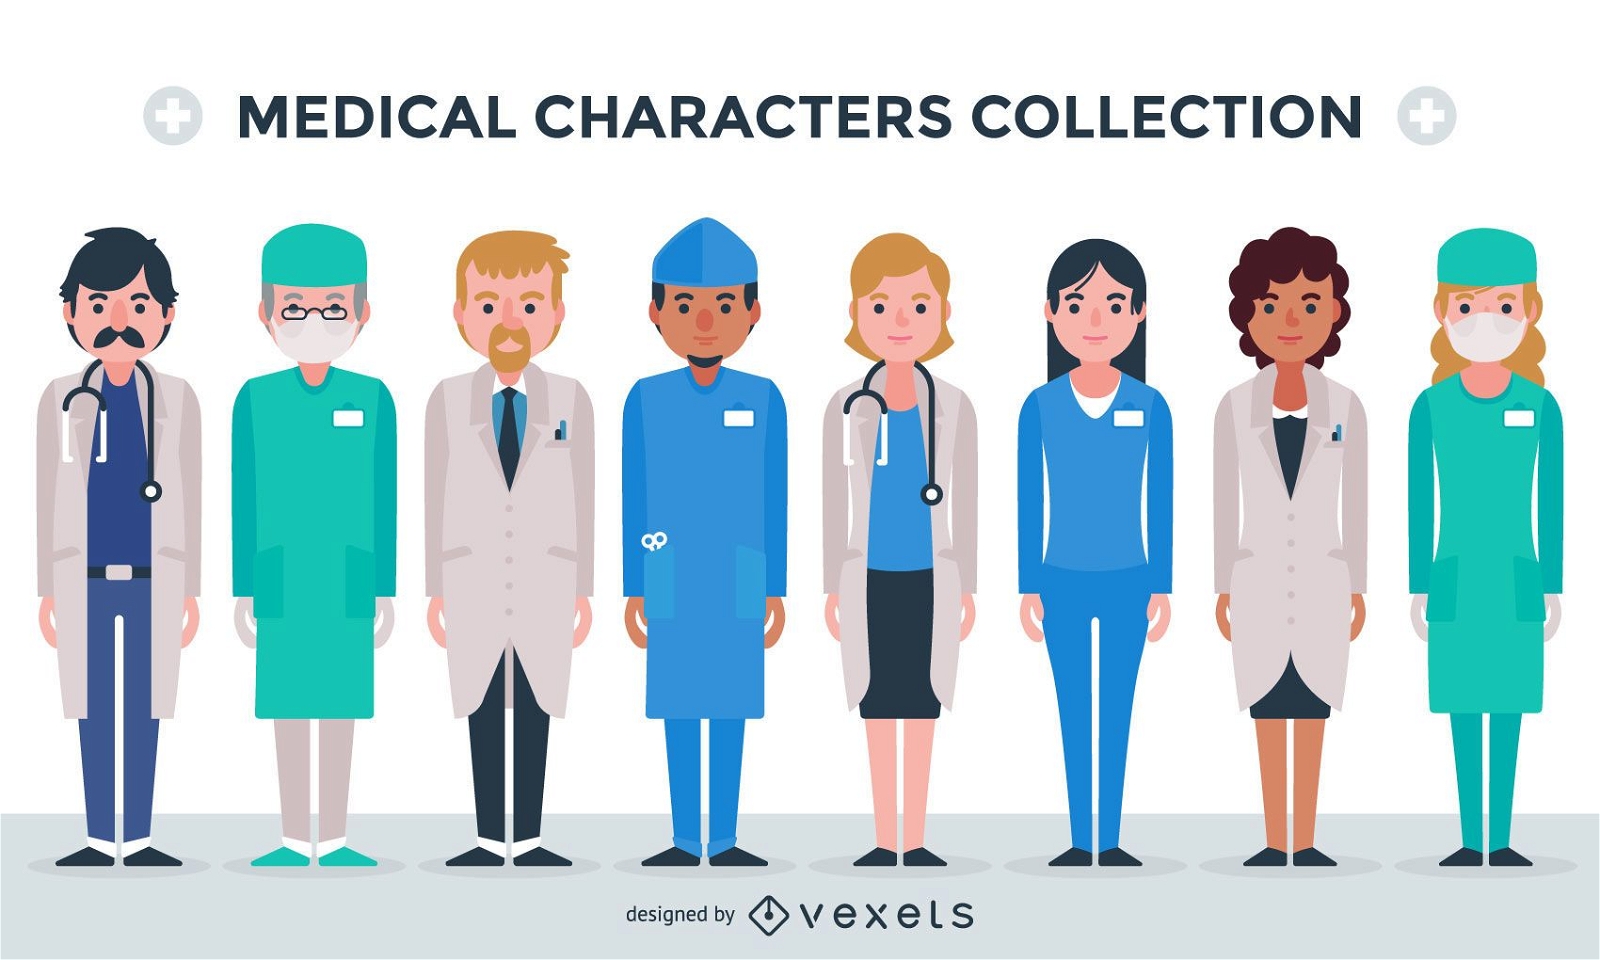 Medical characters collection